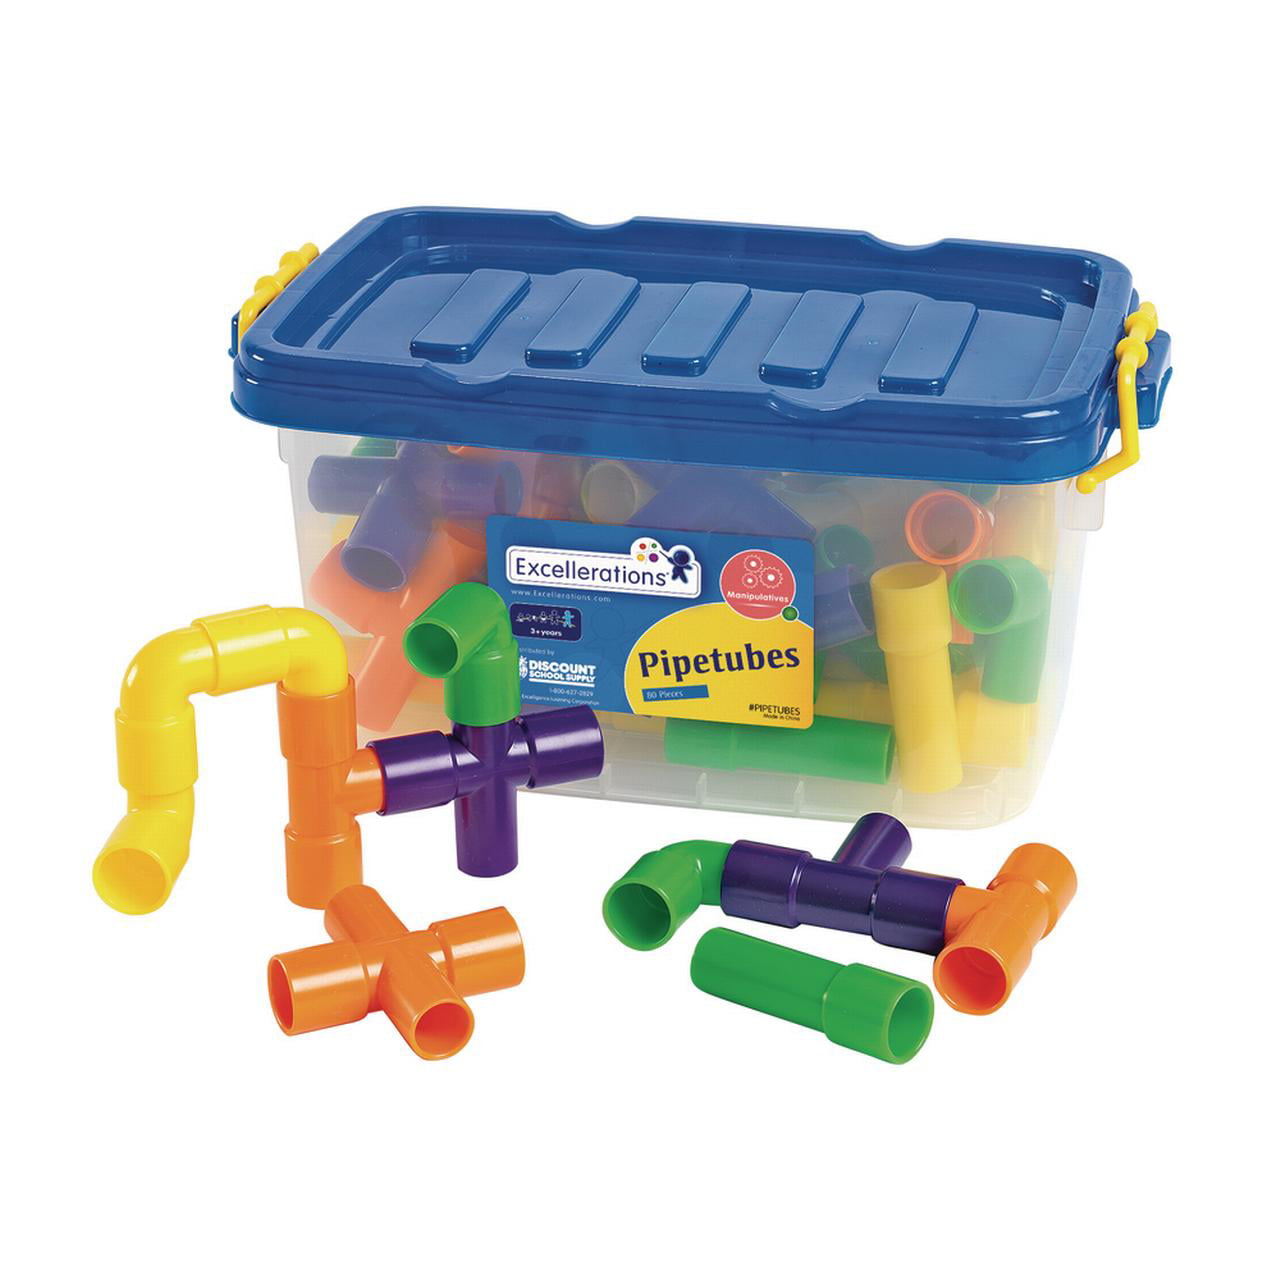 ECR4Kids Totally Tubular Pipes & Spout STEAM Manipulatives Building Block Set 160-Piece Set Interlocking Educational Sensory Learning Toys for Children with Storage Container 